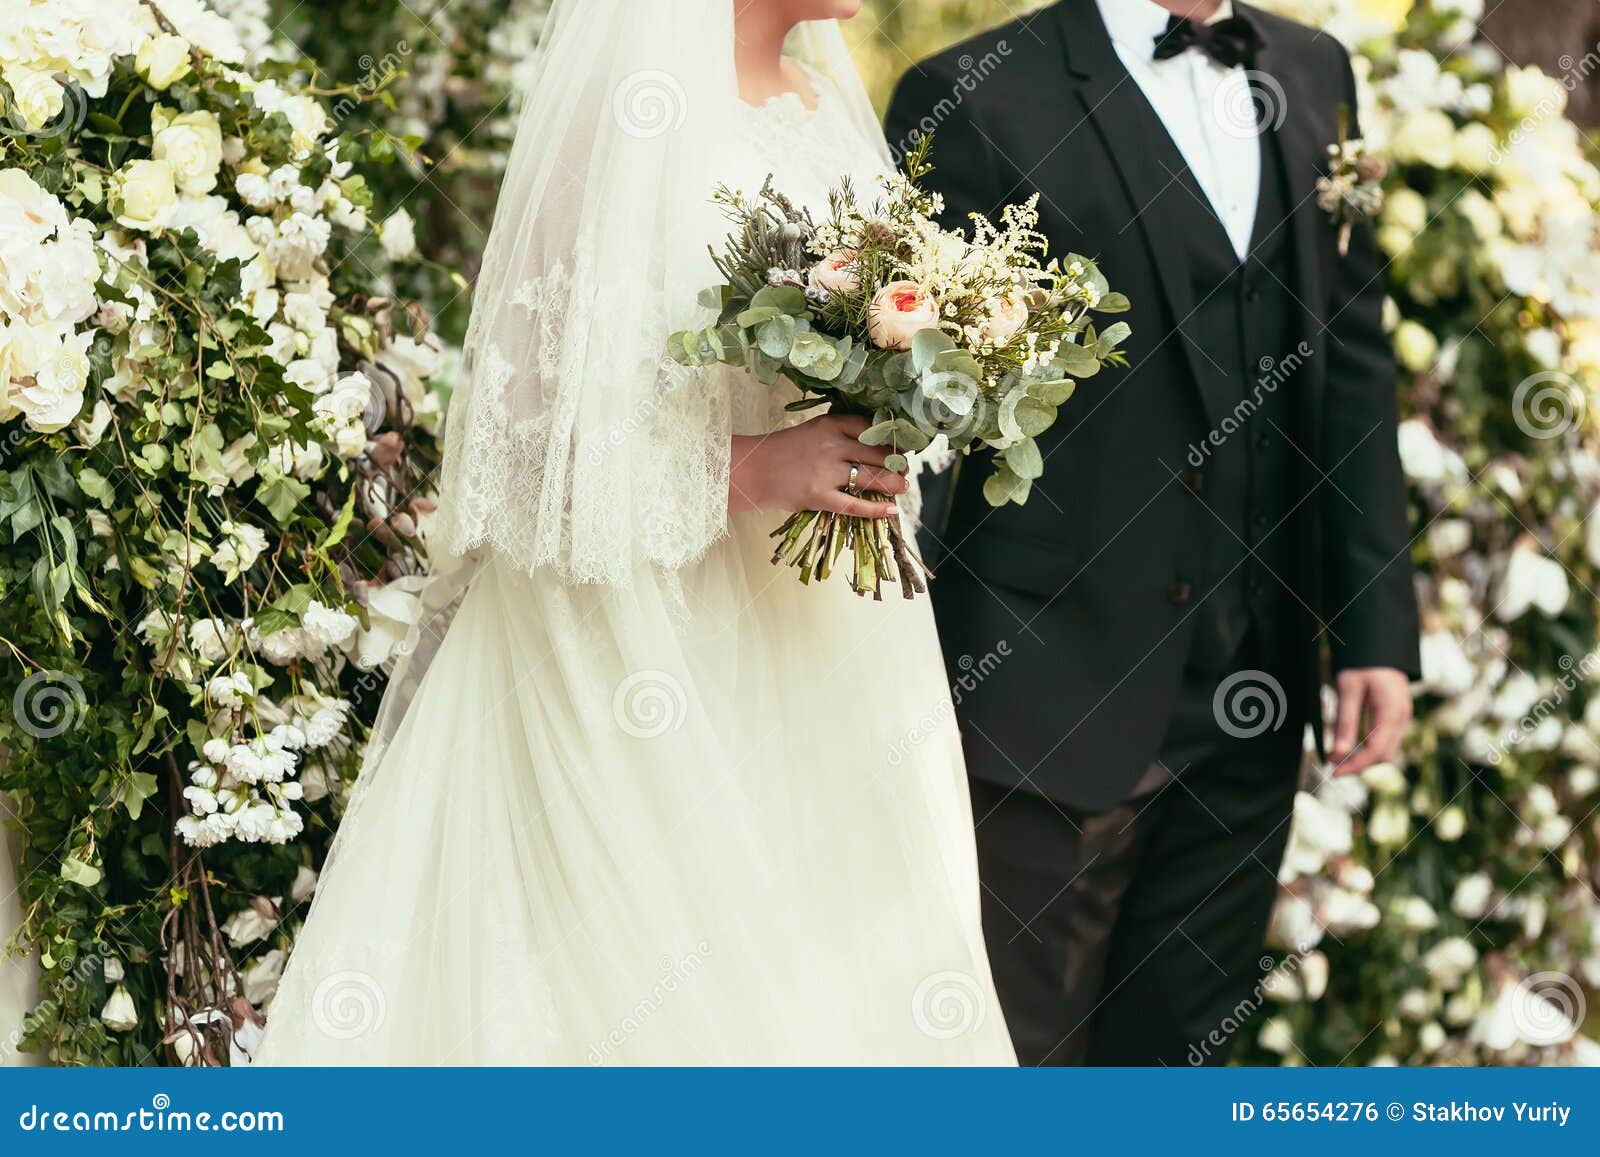 Groom In Black  Suit  And Bride In White Wedding  Dress  With 